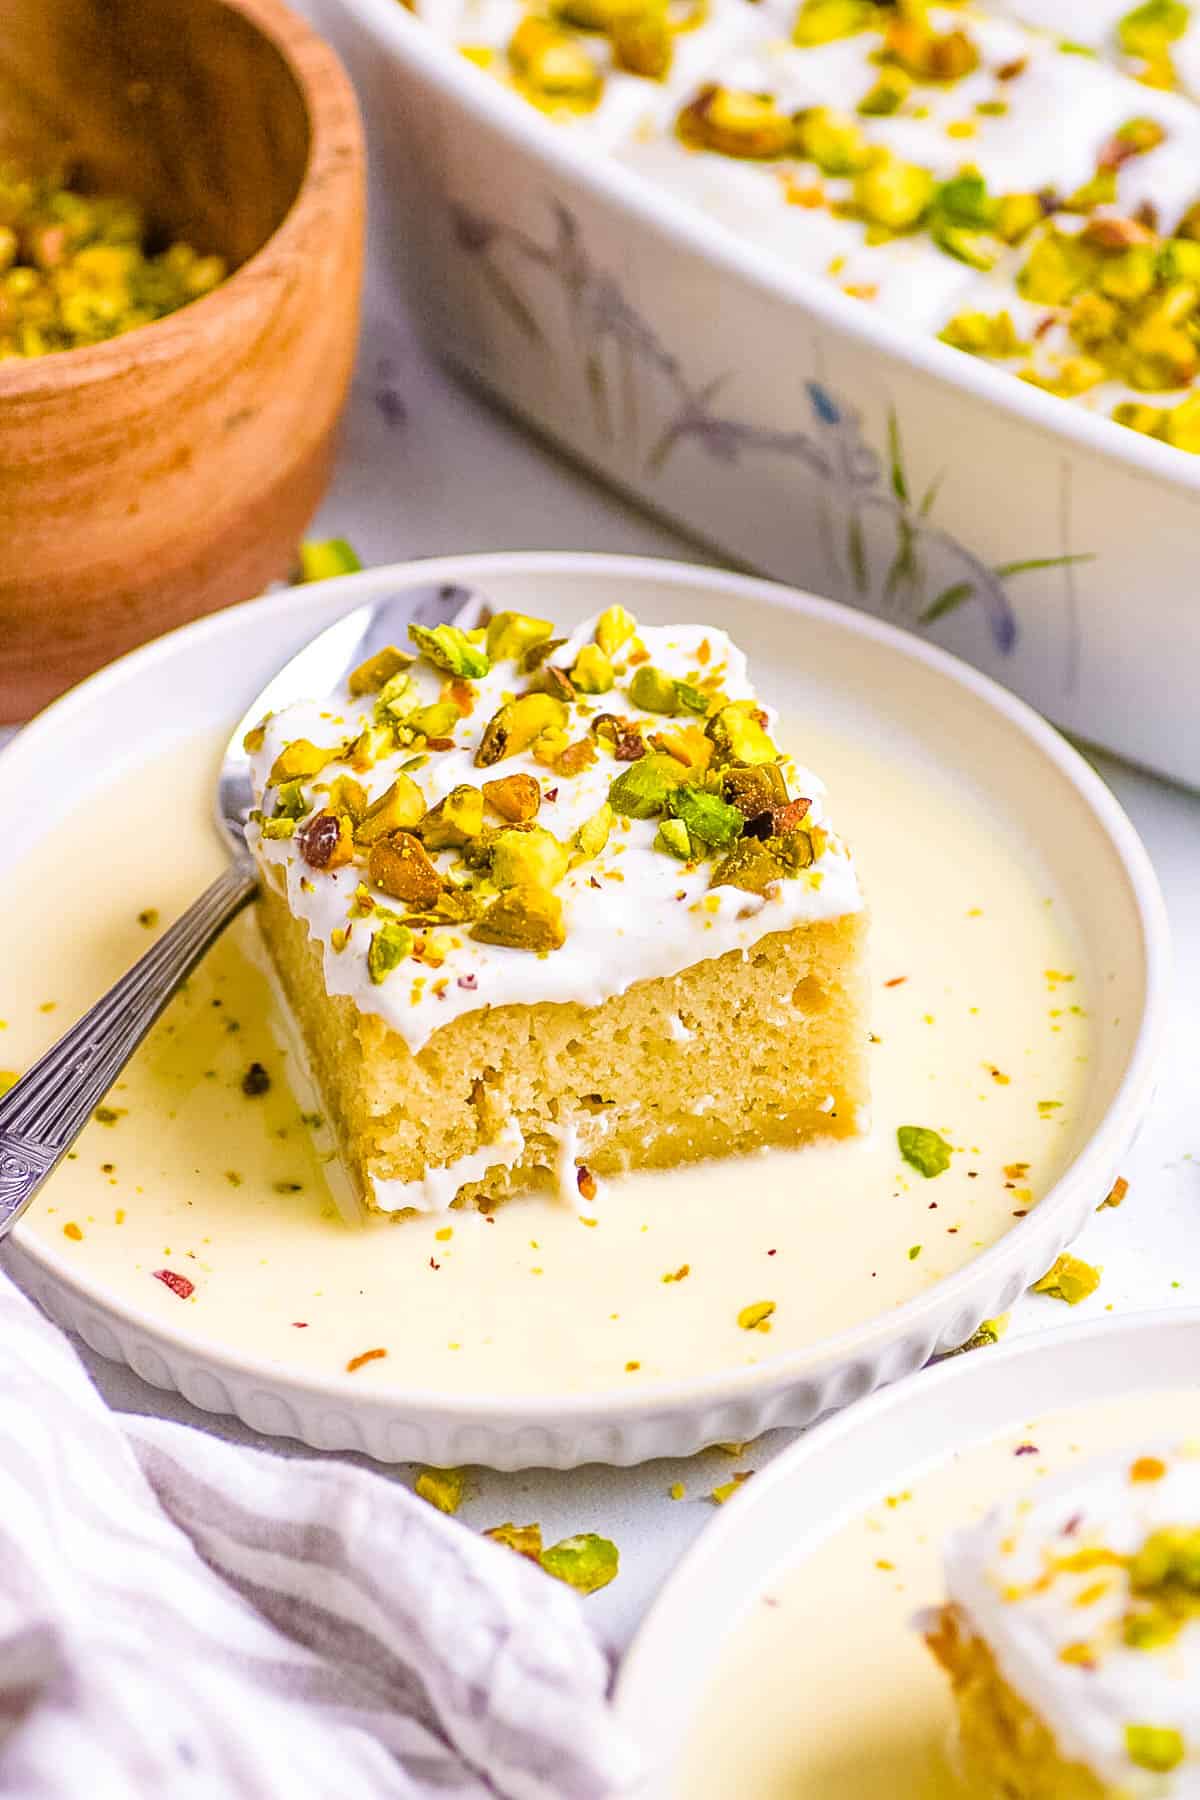 Rasmalai tres leches cake served on a white plate, topped with pistachios and the sweetened milk mixture. - Indian Dessert Recipes